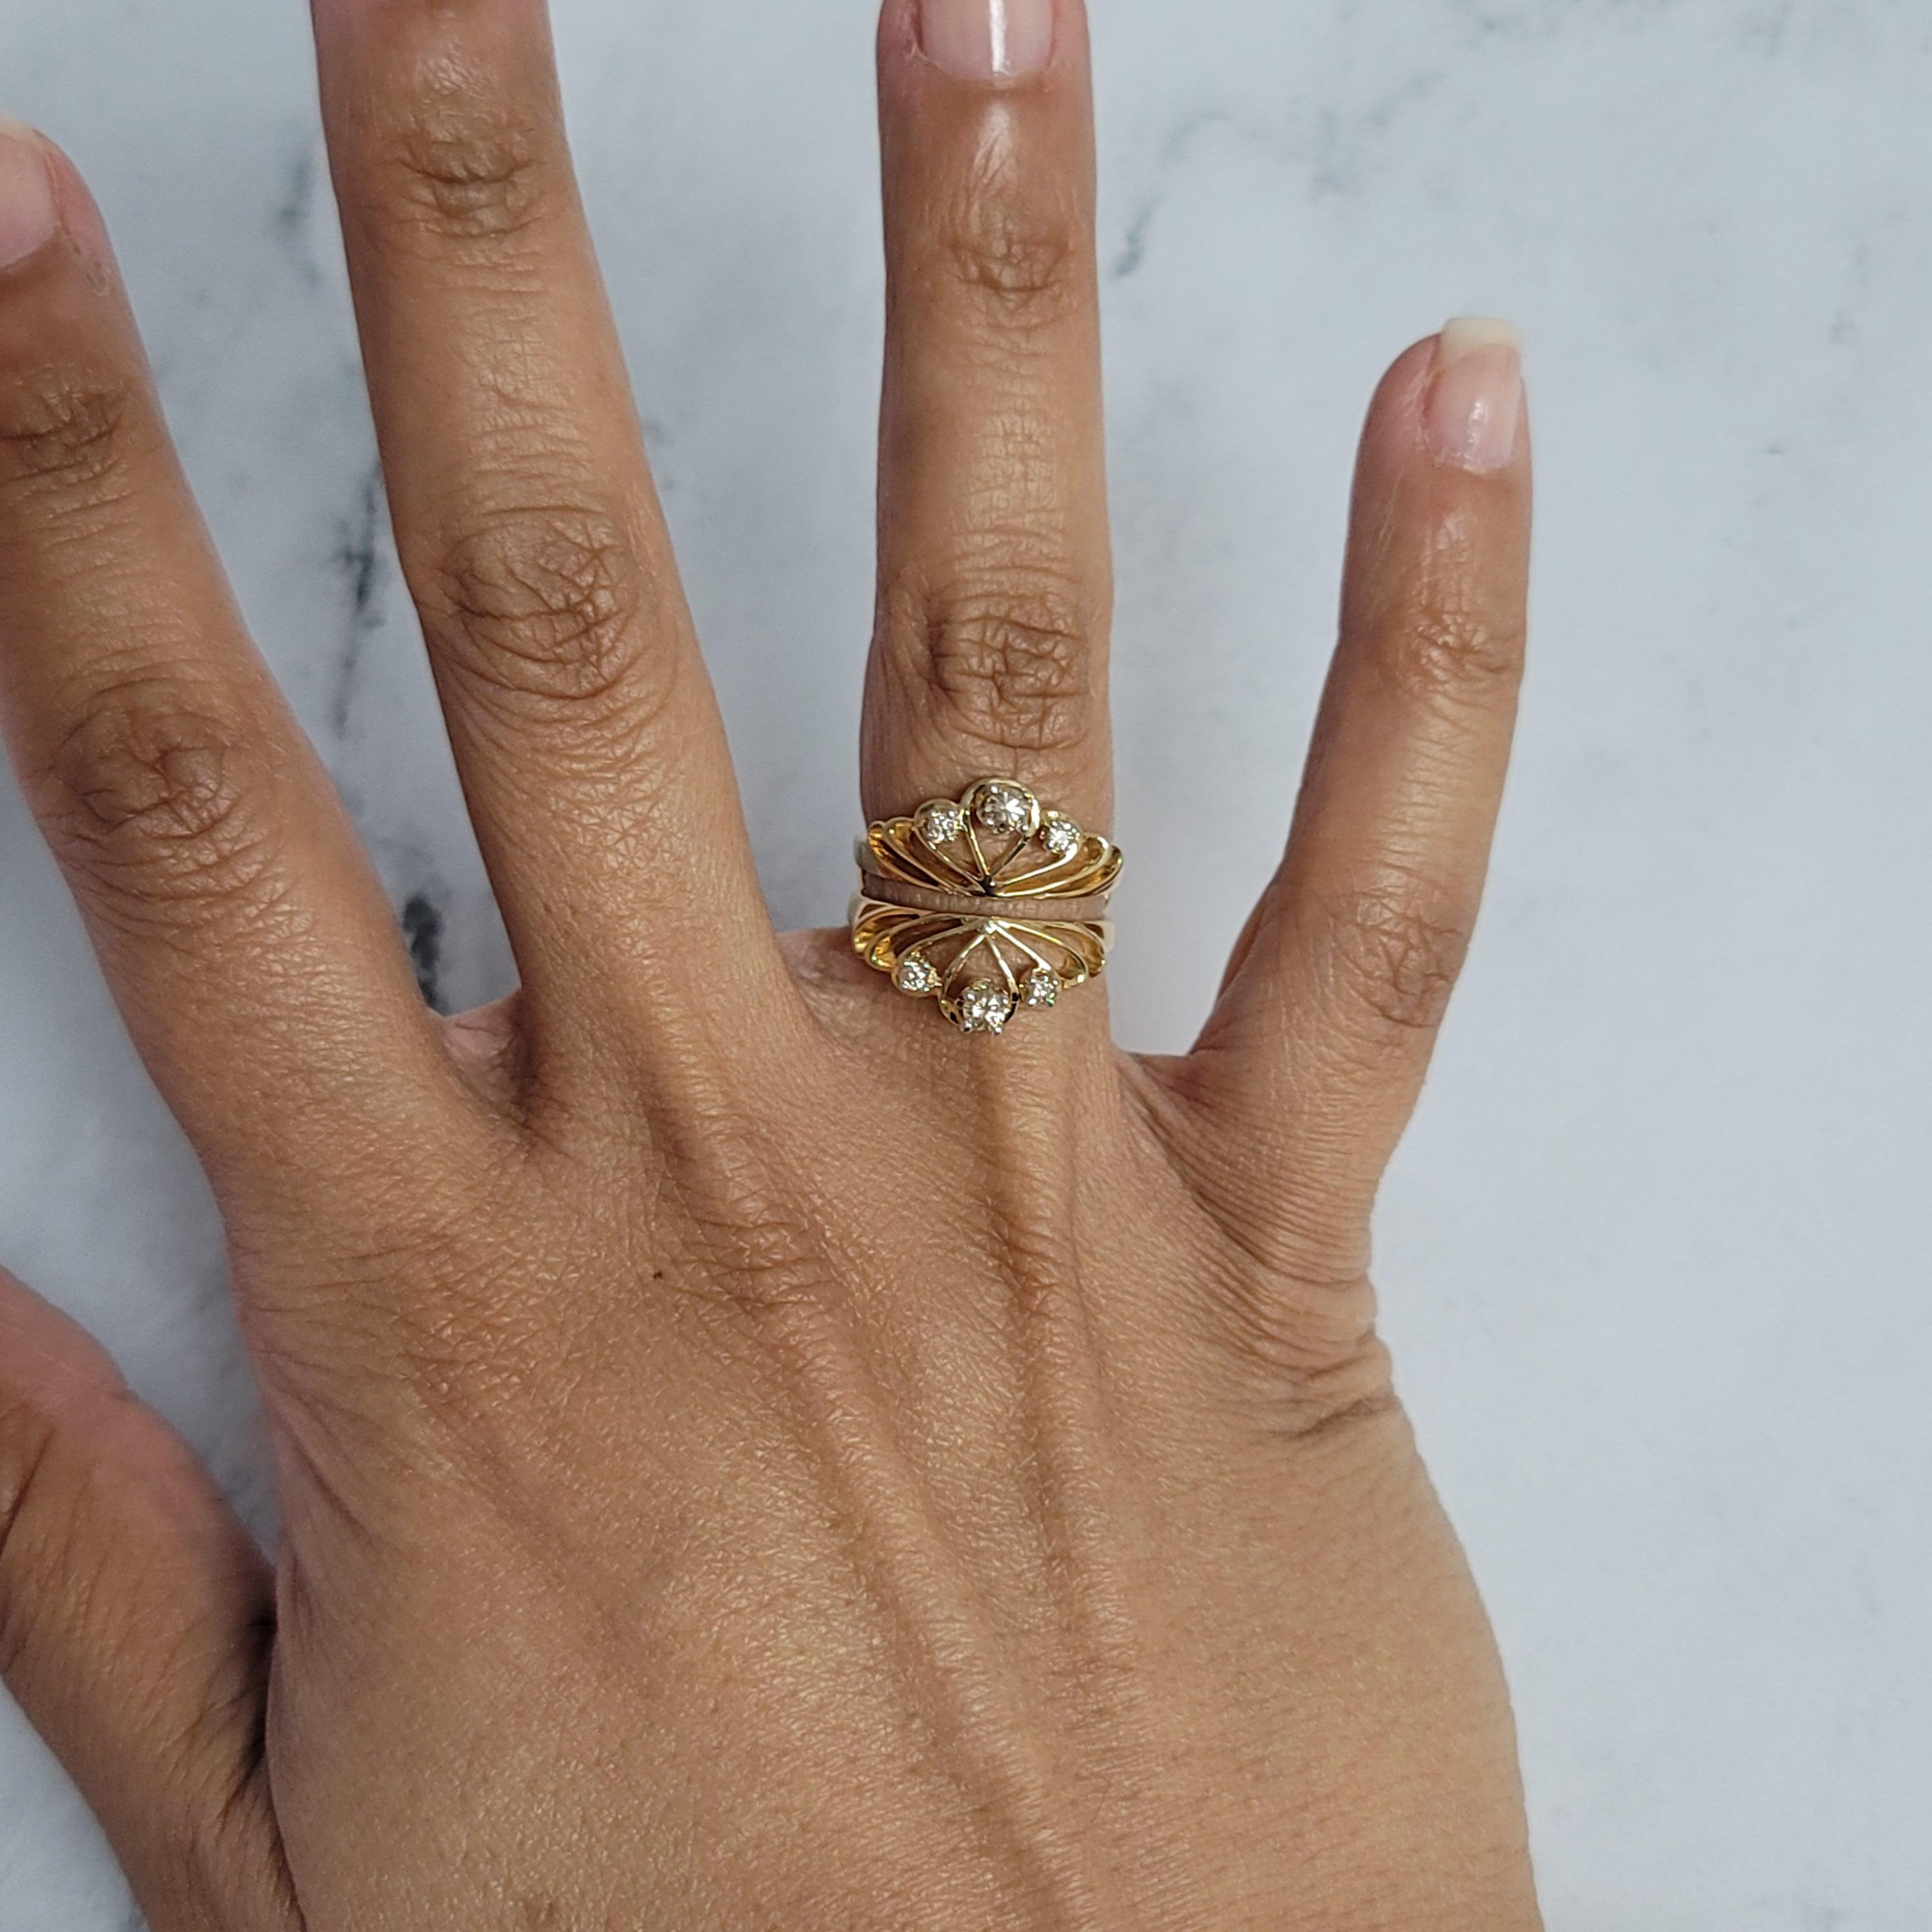 ♥ Ring Summary ♥

Main Stone: Diamond
Approx. Carat Weight: .36cttw
Diamond Clarity: VS2/SI1
Diamond Color: I/J
Band Material: 14k Yellow Gold
Dimension Height: 17mm
Stone Cut: Round